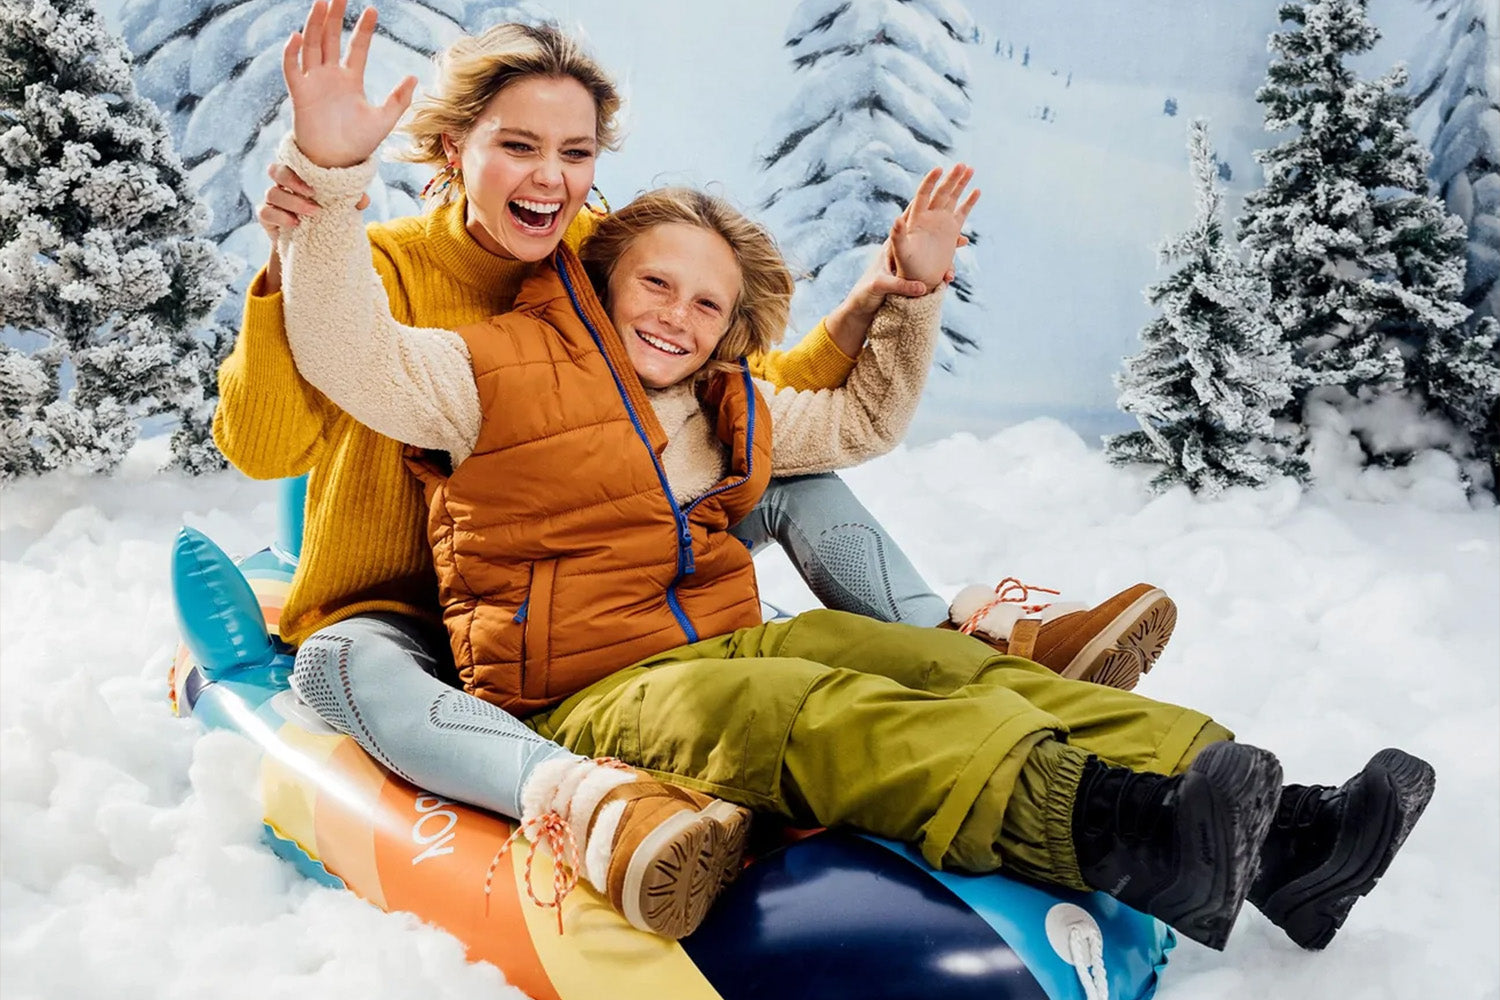 Where To Go Snow Tubing in New Hampshire